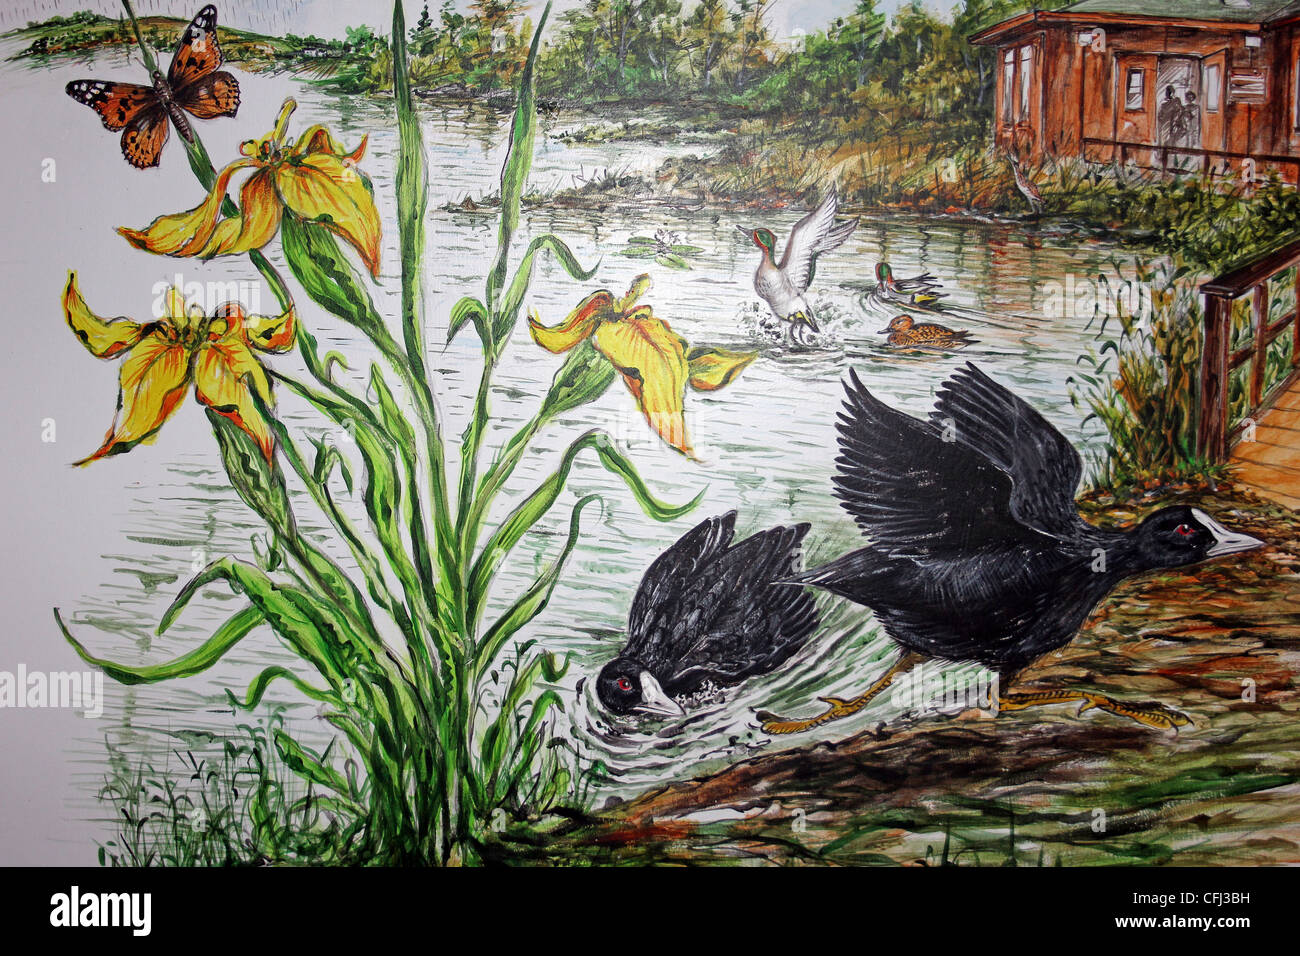 Painting Of The Visitor Centre And Pond At Mere Sands Wood Nature Reserve, UK Stock Photo